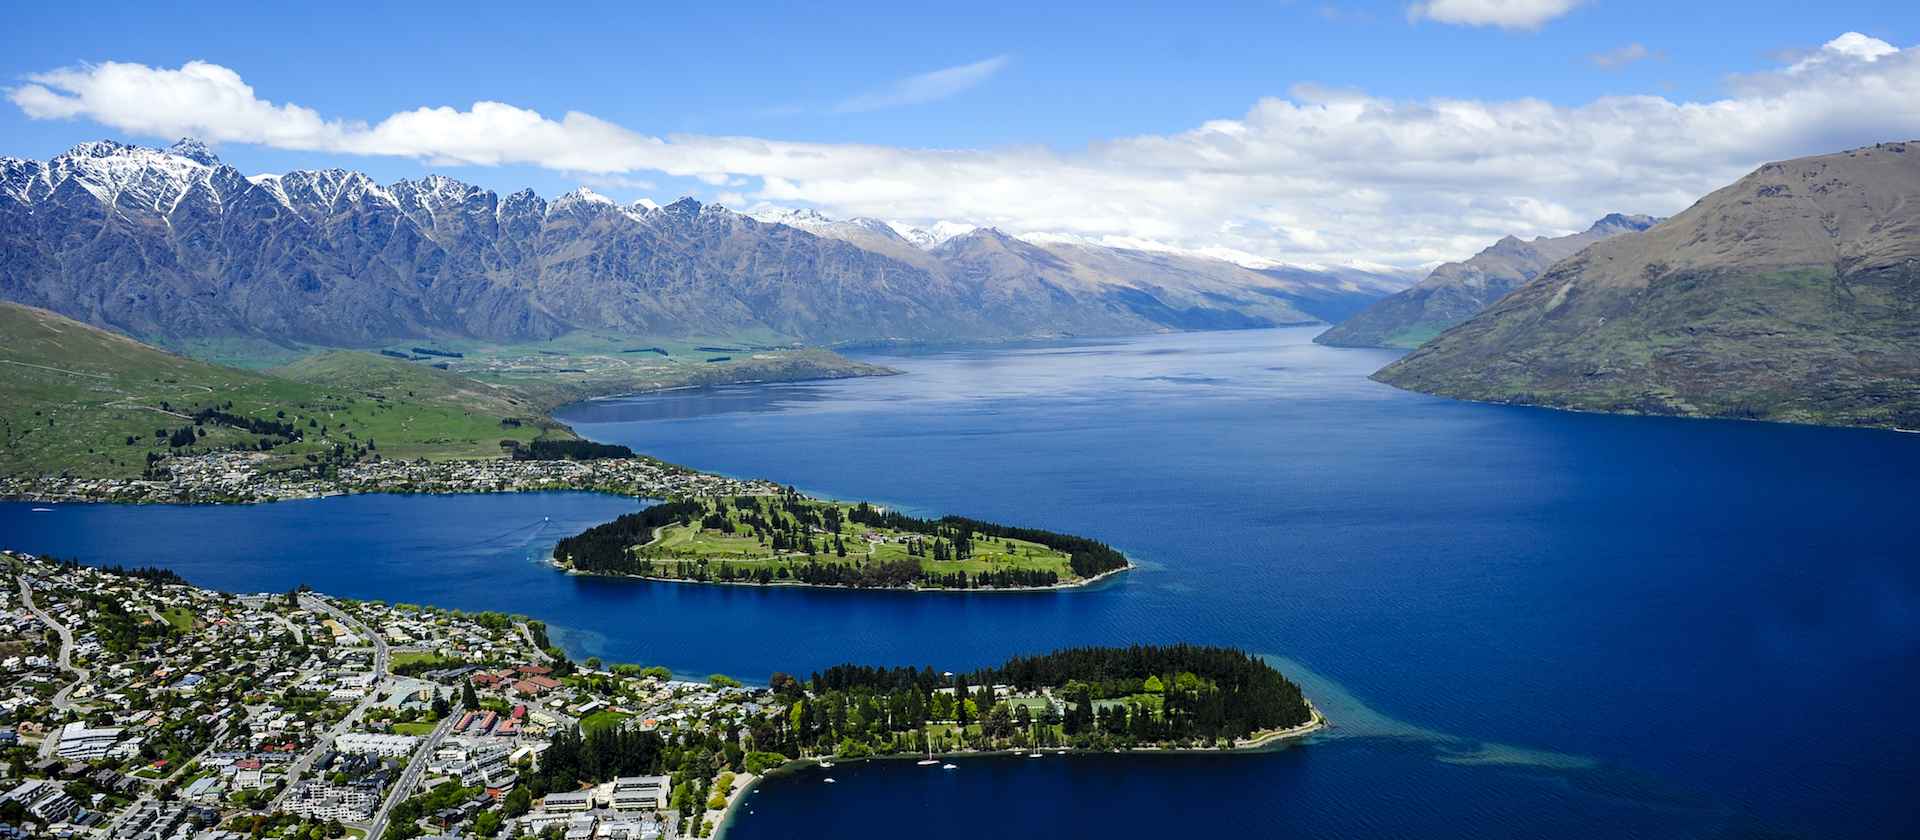 Lakes & Fiords of the South Island